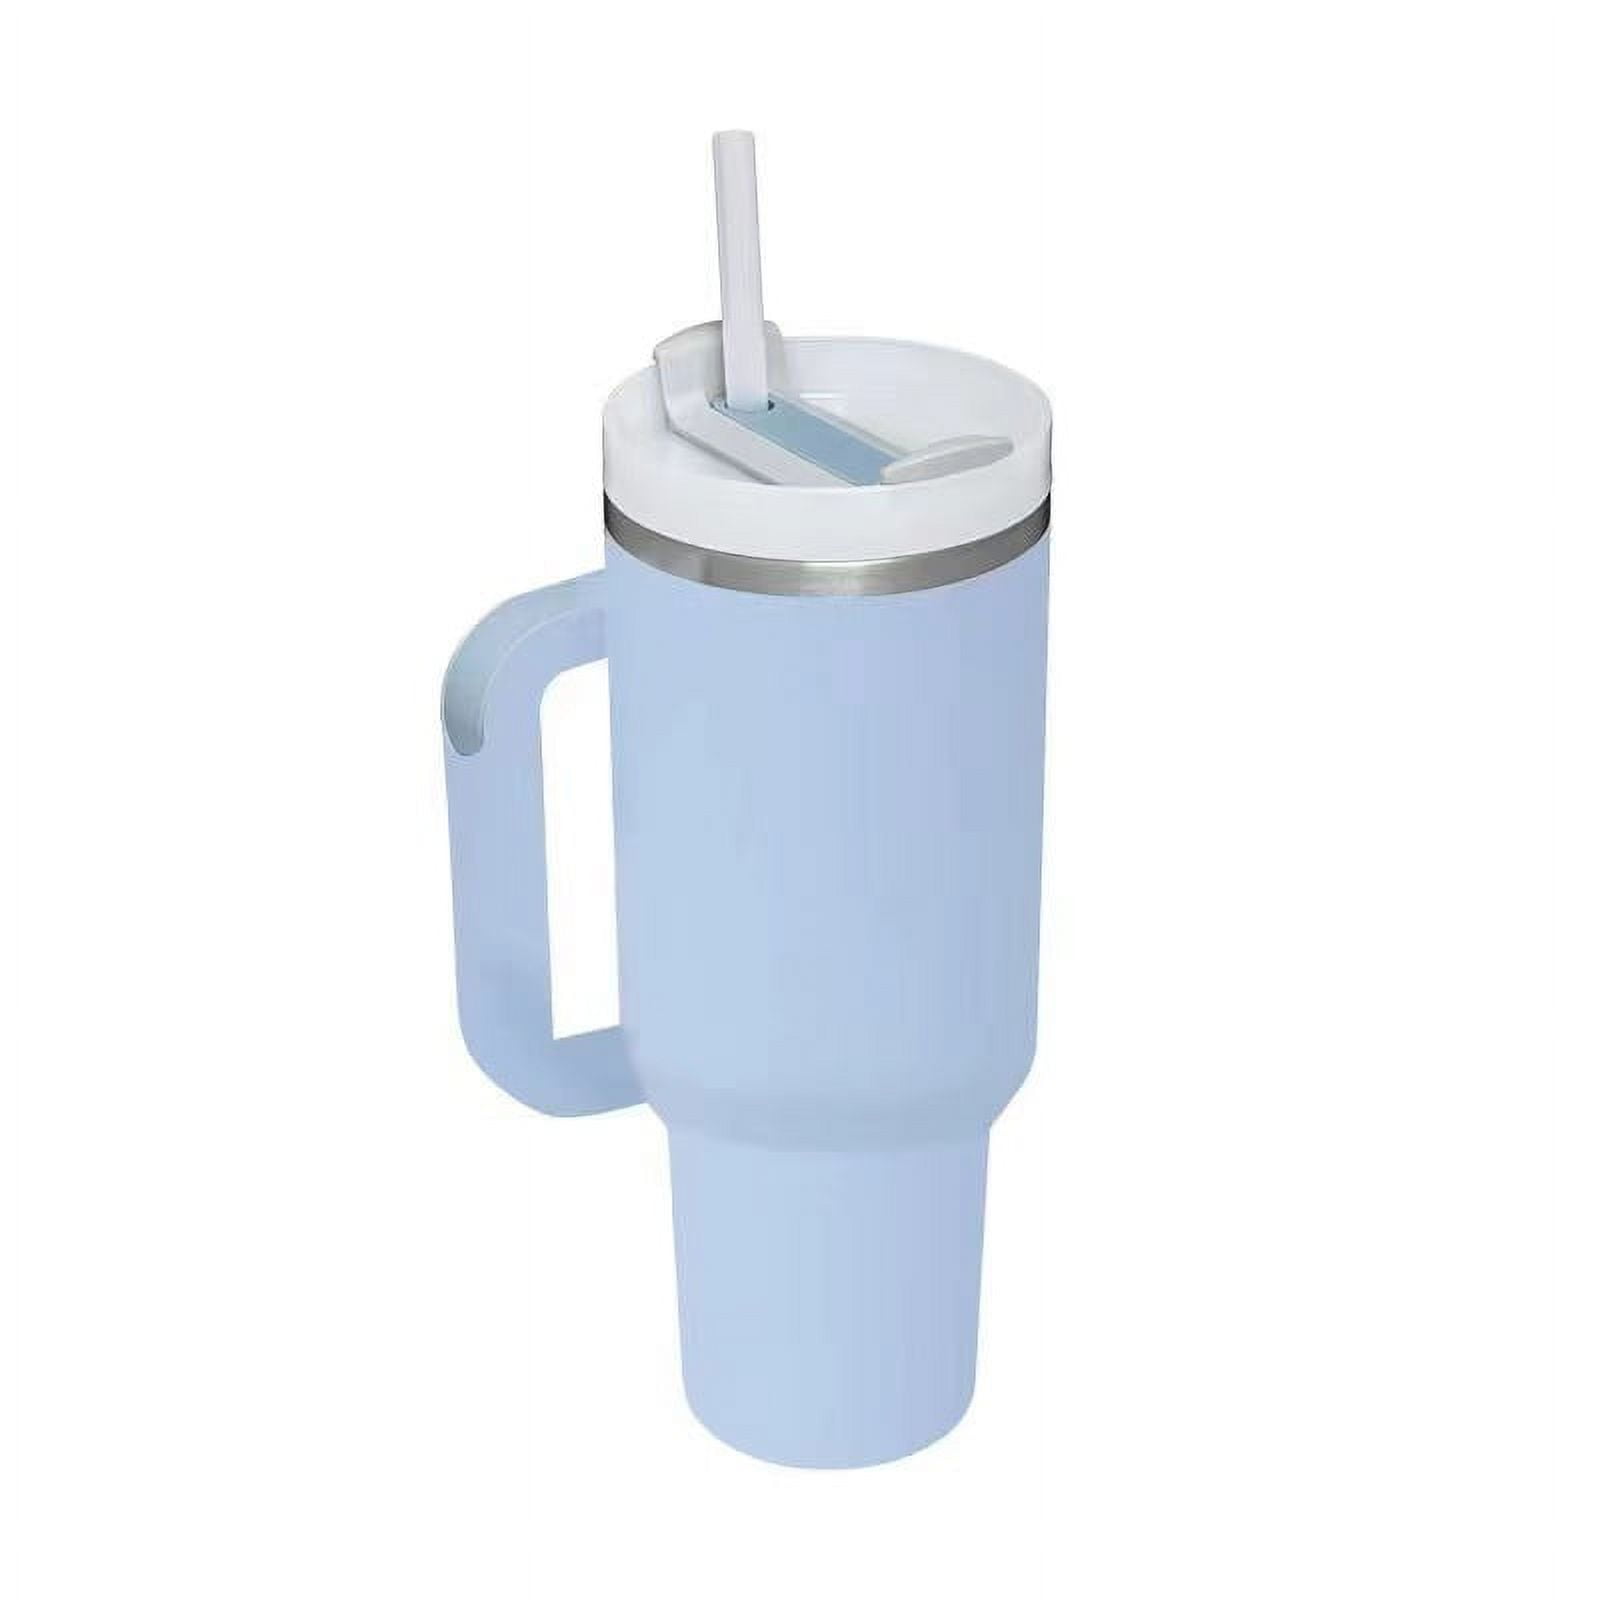 40 oz Tumbler with Handle and Straw (RTS4959)